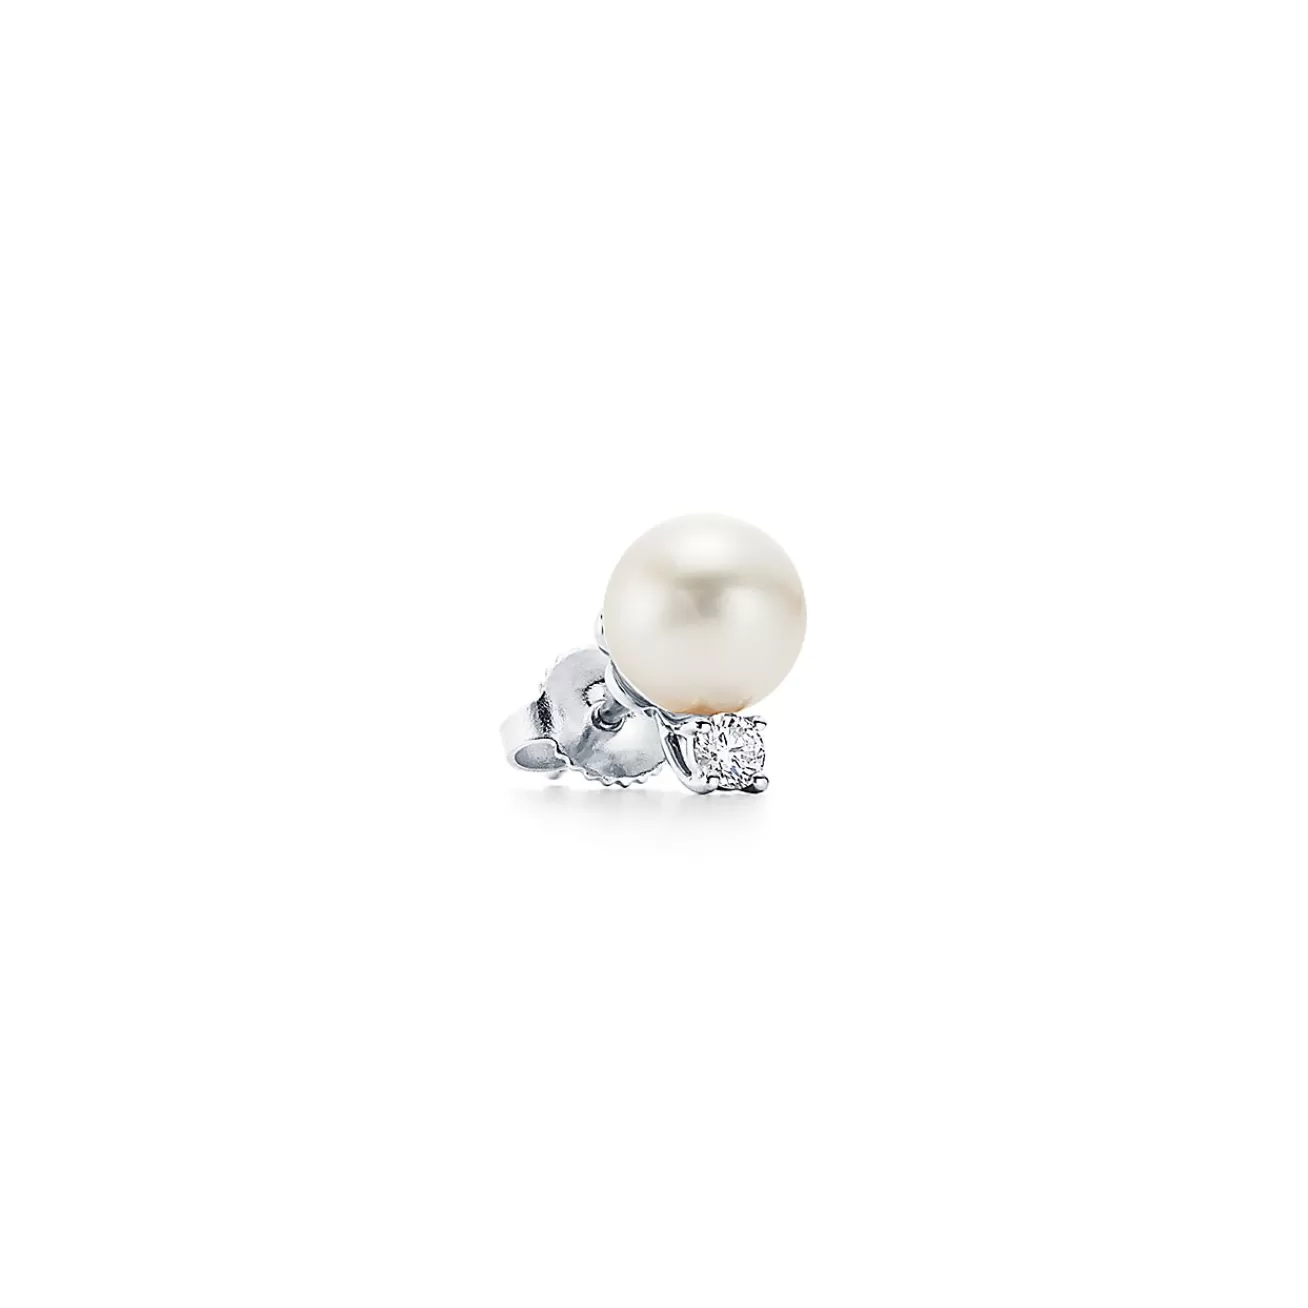 Tiffany & Co. Tiffany Signature® Pearls earrings in 18k white gold with pearls and diamonds. | ^ Earrings | Diamond Jewelry